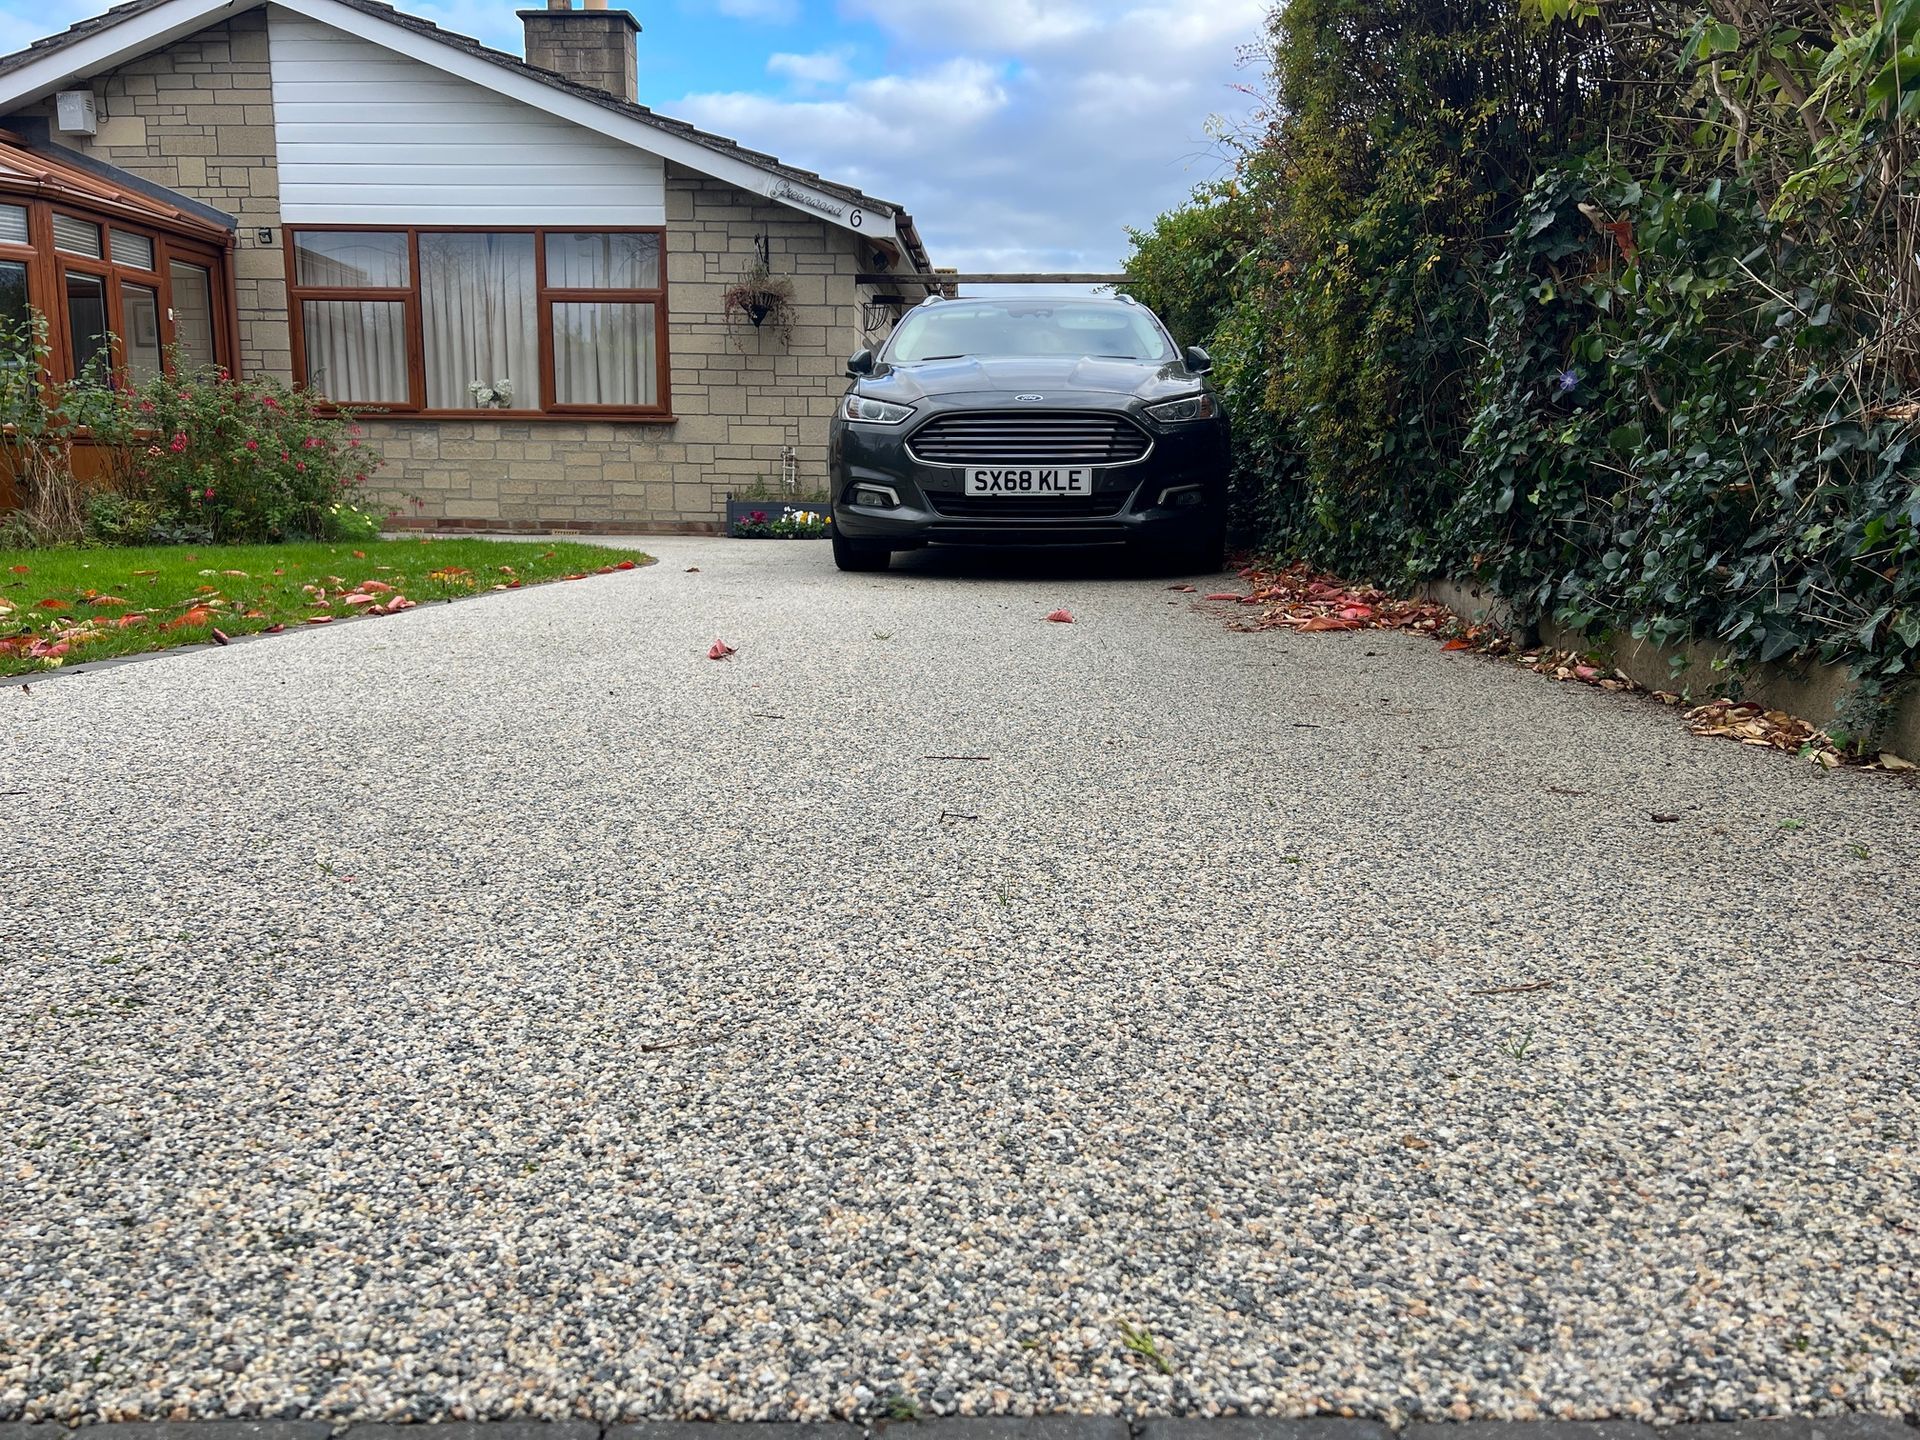 Grey resin driveway leading up to a grey bungalow, with a car parked at the top of the drive.